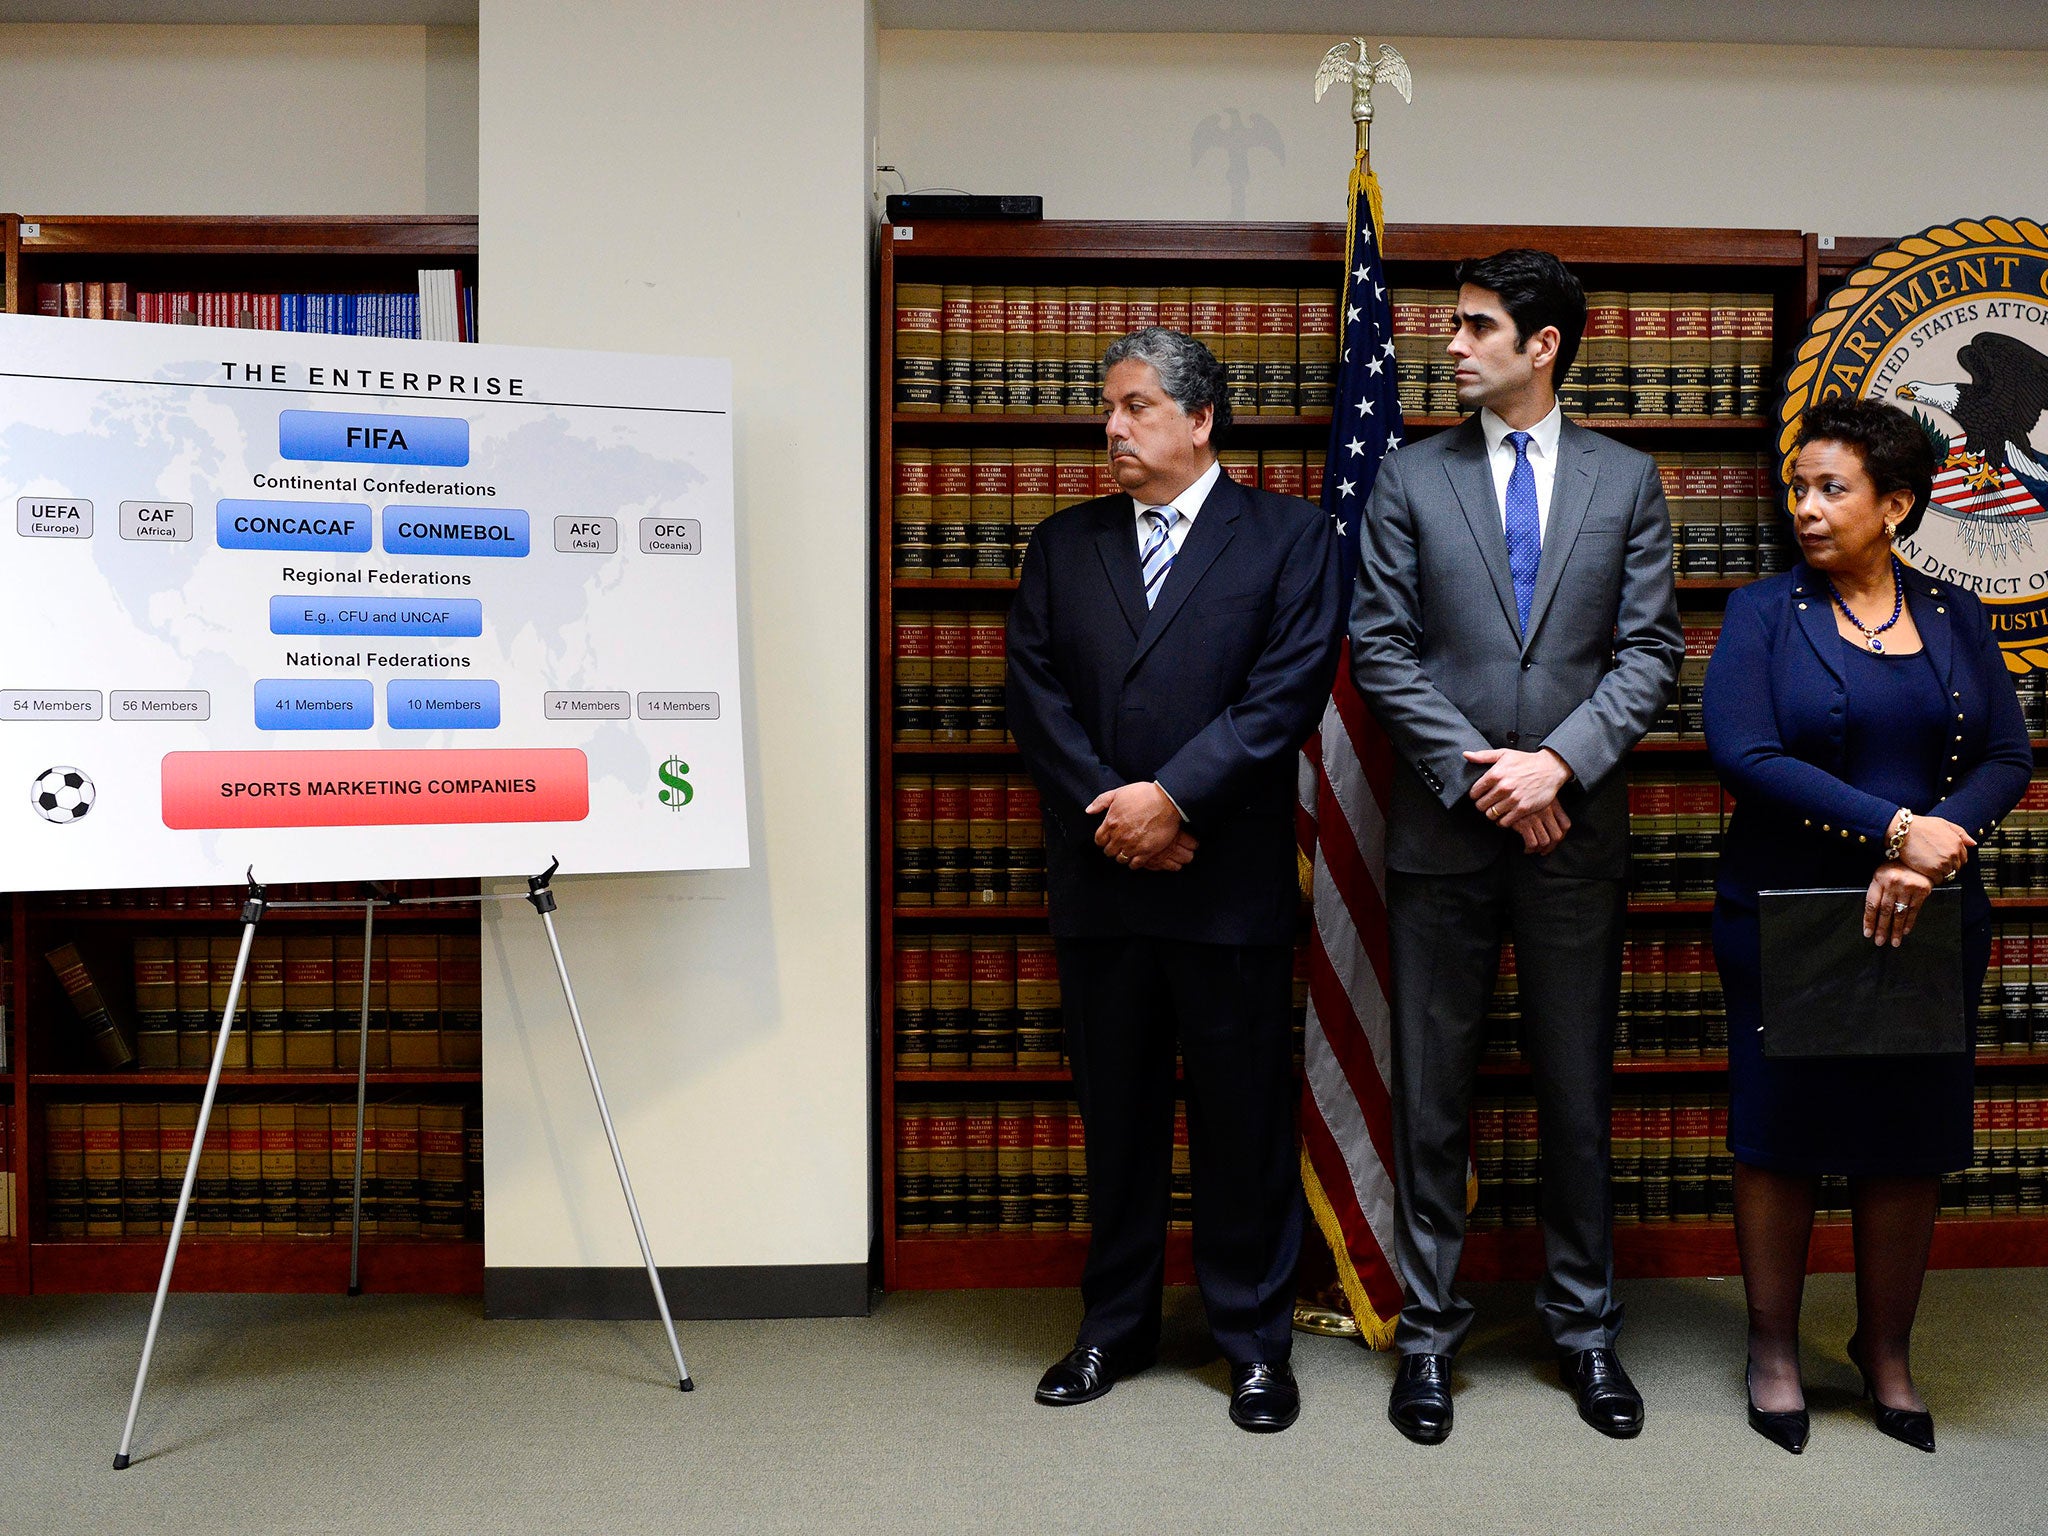 United States Attorney General Loretta E. Lynch, right, federal prosecutor Evan Norris, centre, and a representative from the Internal Revenue Service attend a press conference about the arrests of nine FIFA officials in Brooklyn, New York